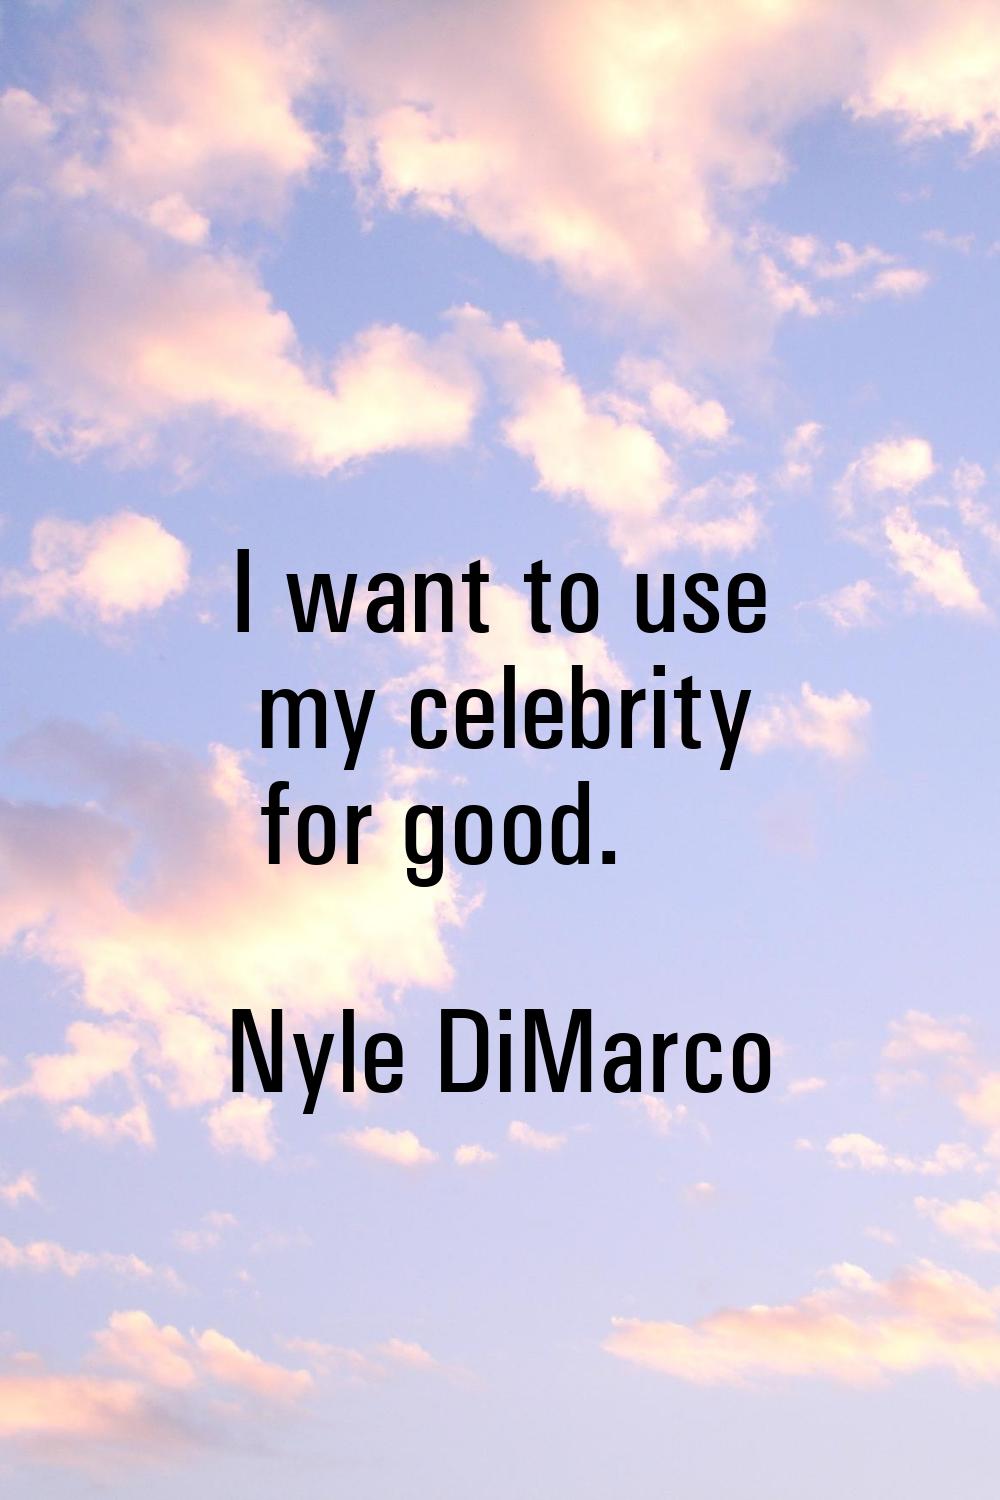 I want to use my celebrity for good.